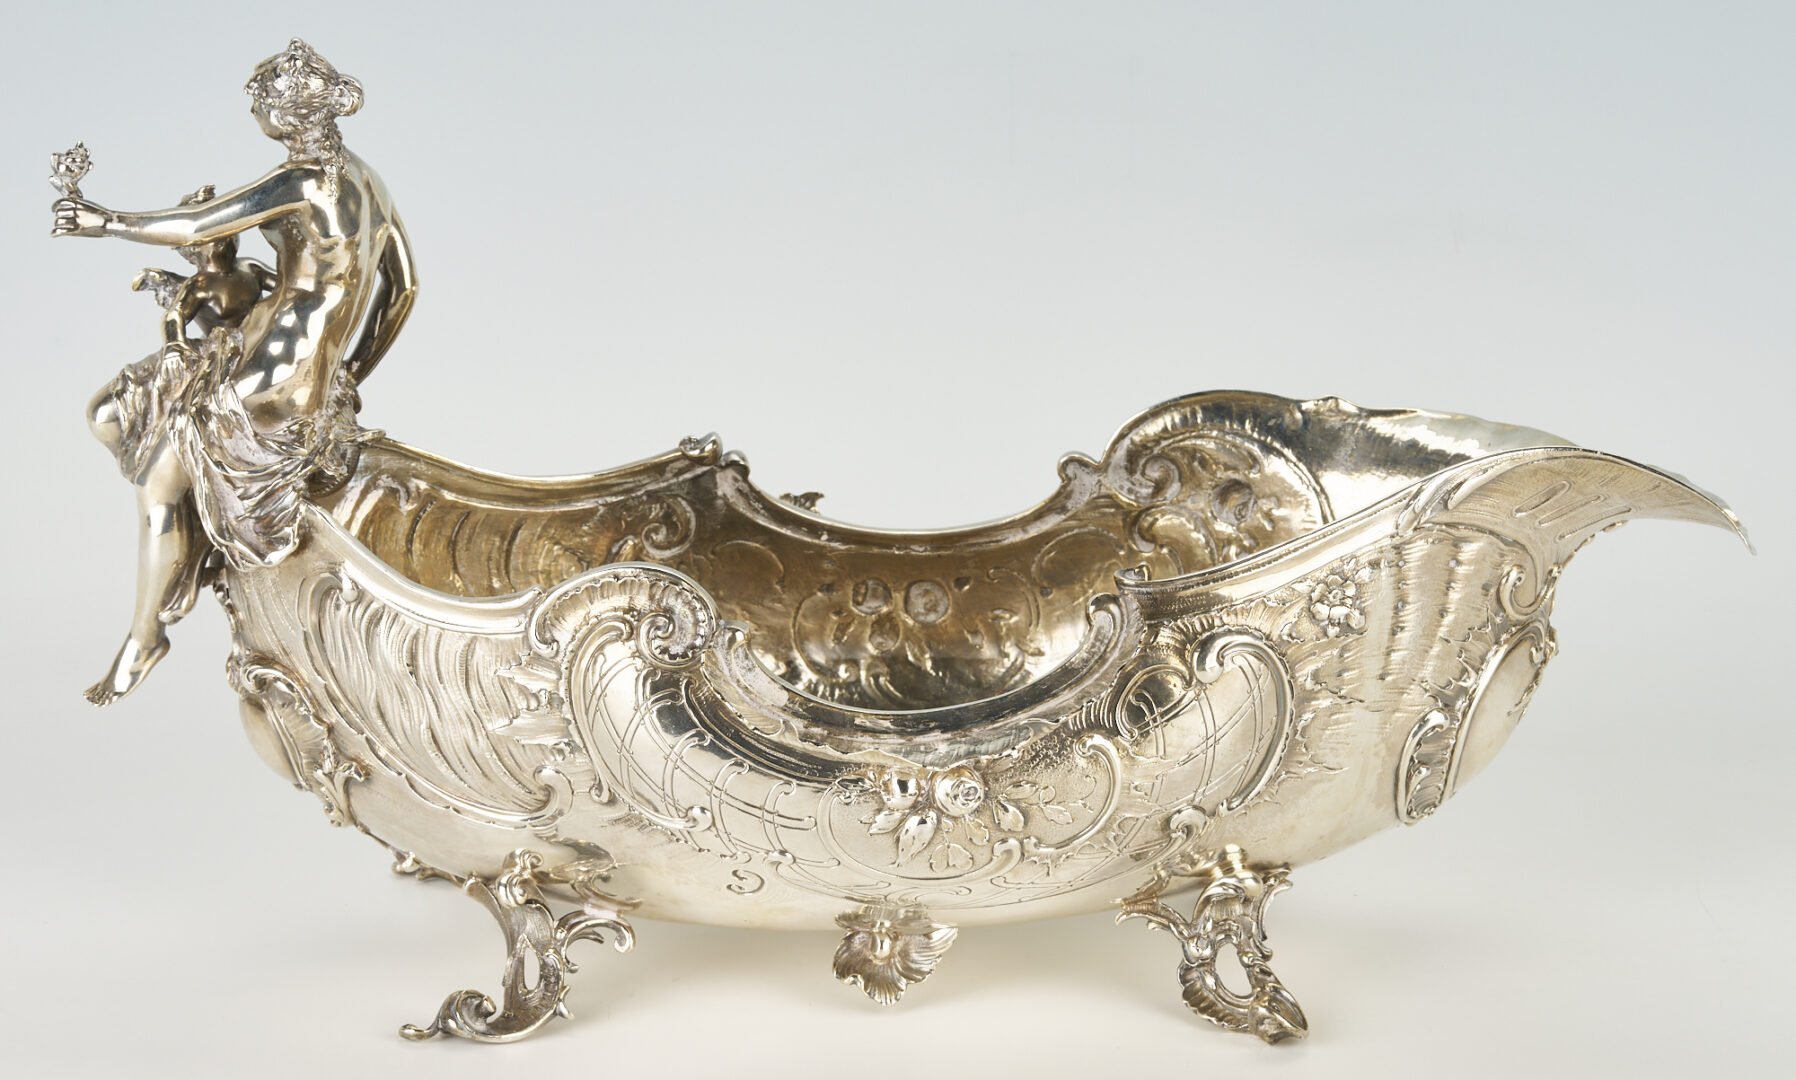 Lot 40: Continental Figural Silver Centerpiece or Serving Bowl